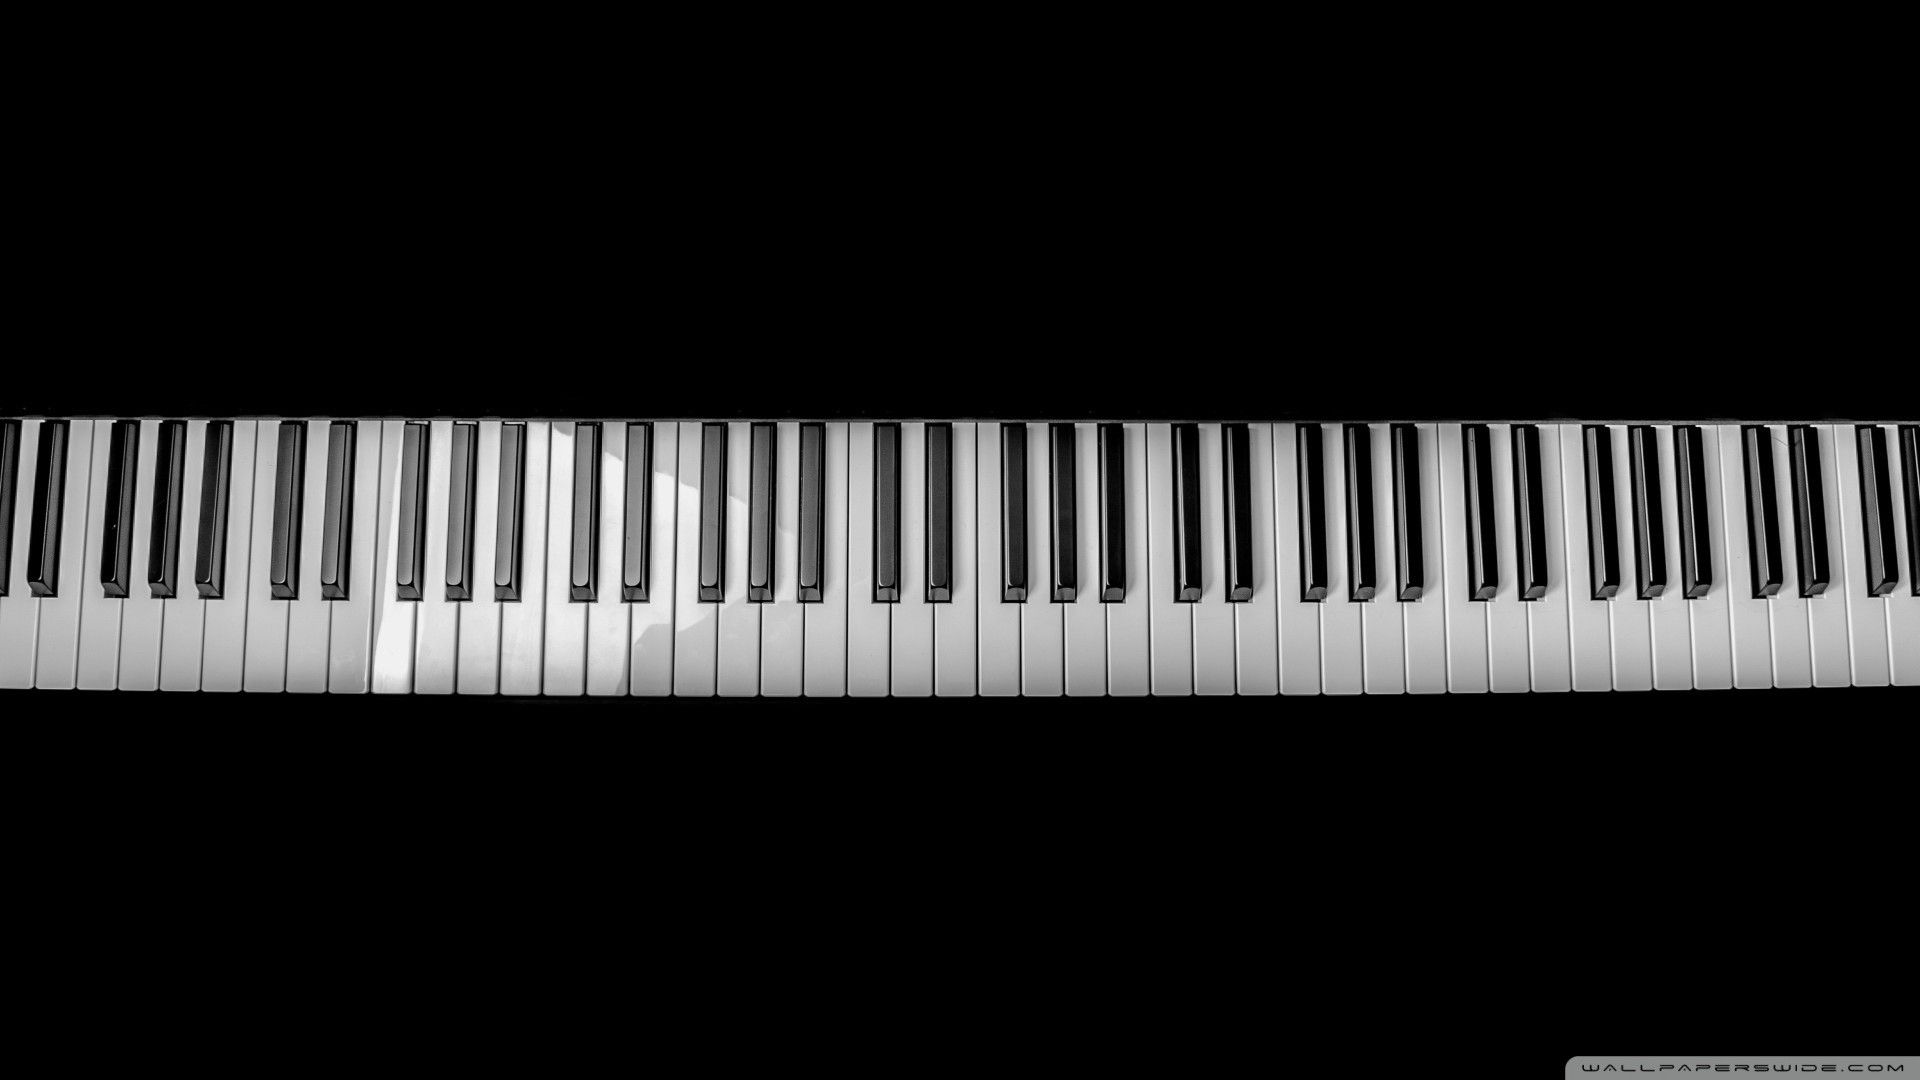 Piano Keys Wallpaper background picture